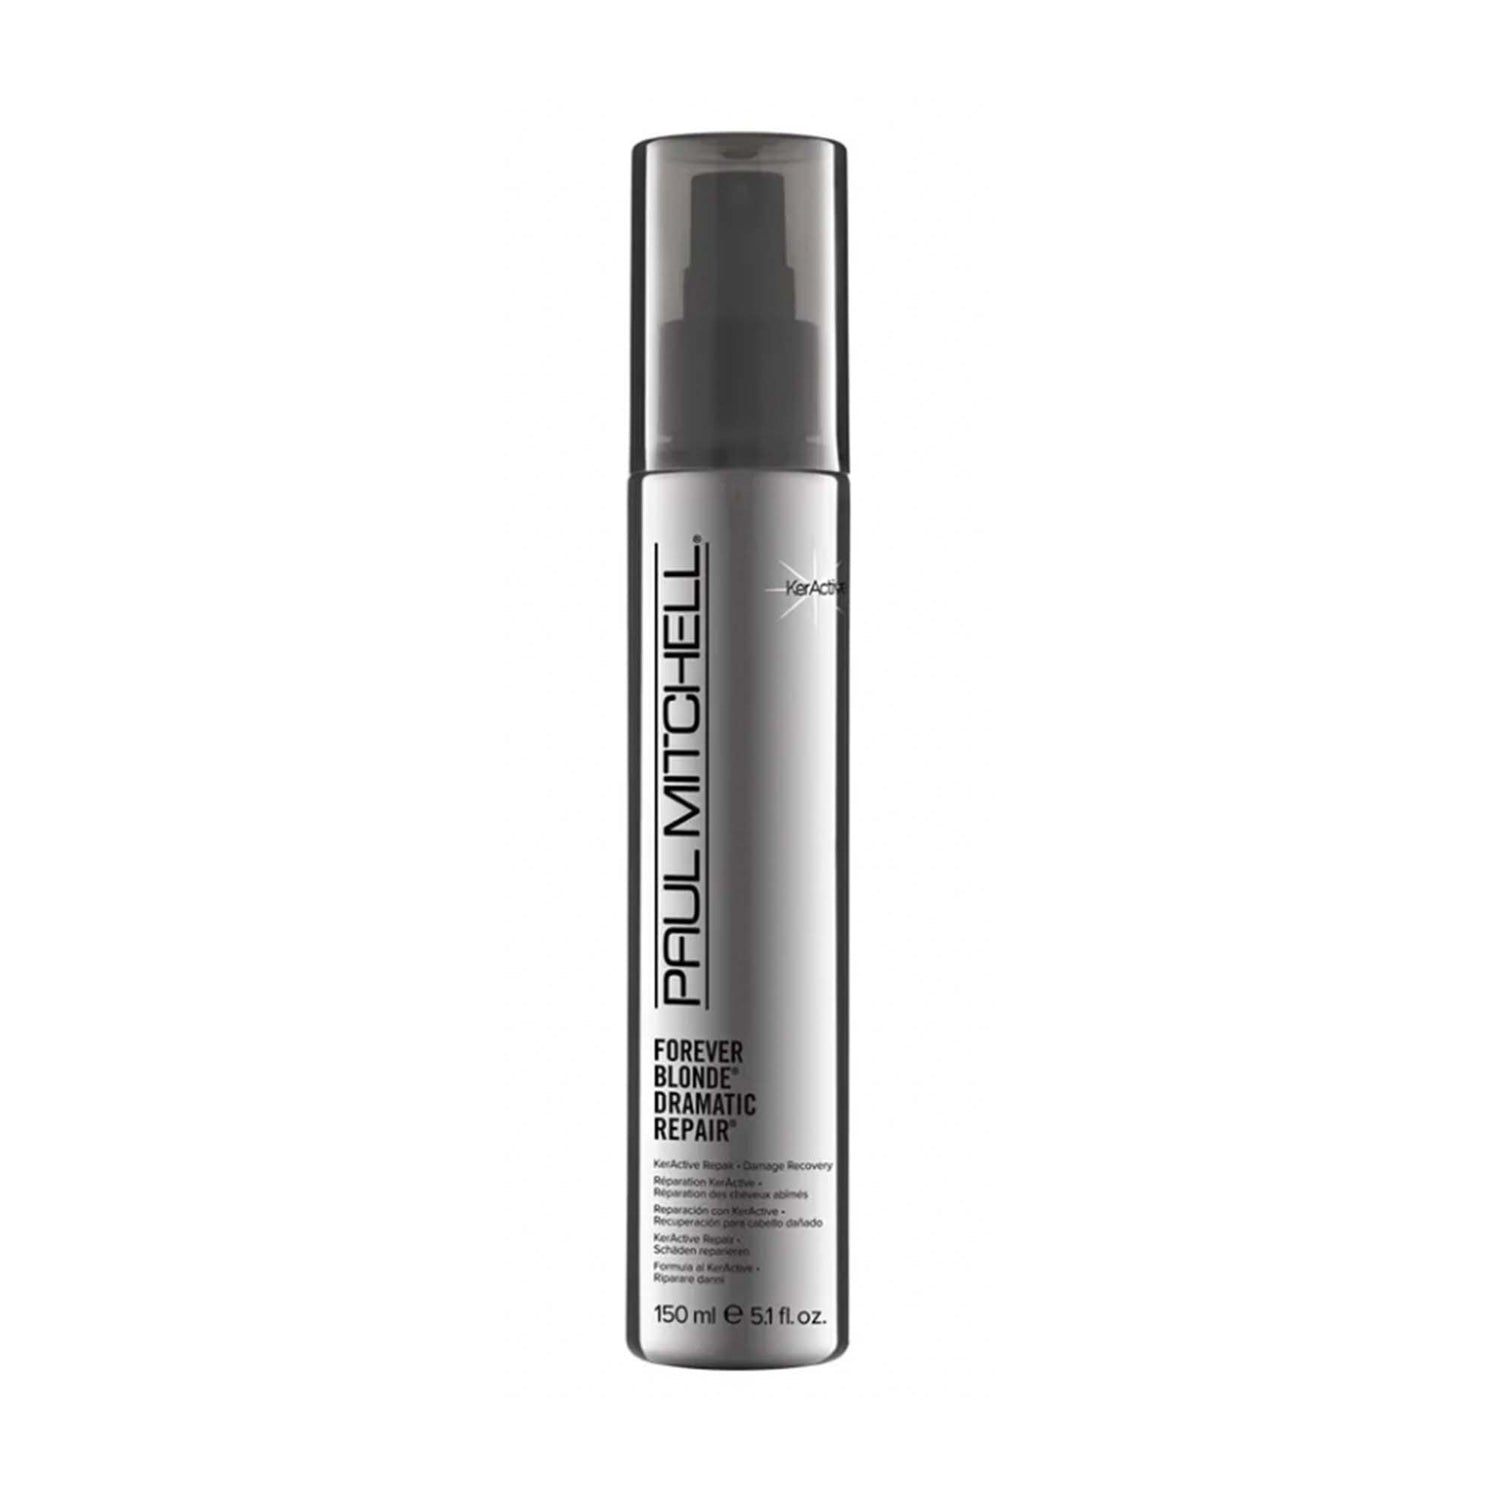 Paul Mitchell Forever Blonde Dramatic Repair 5.1oz